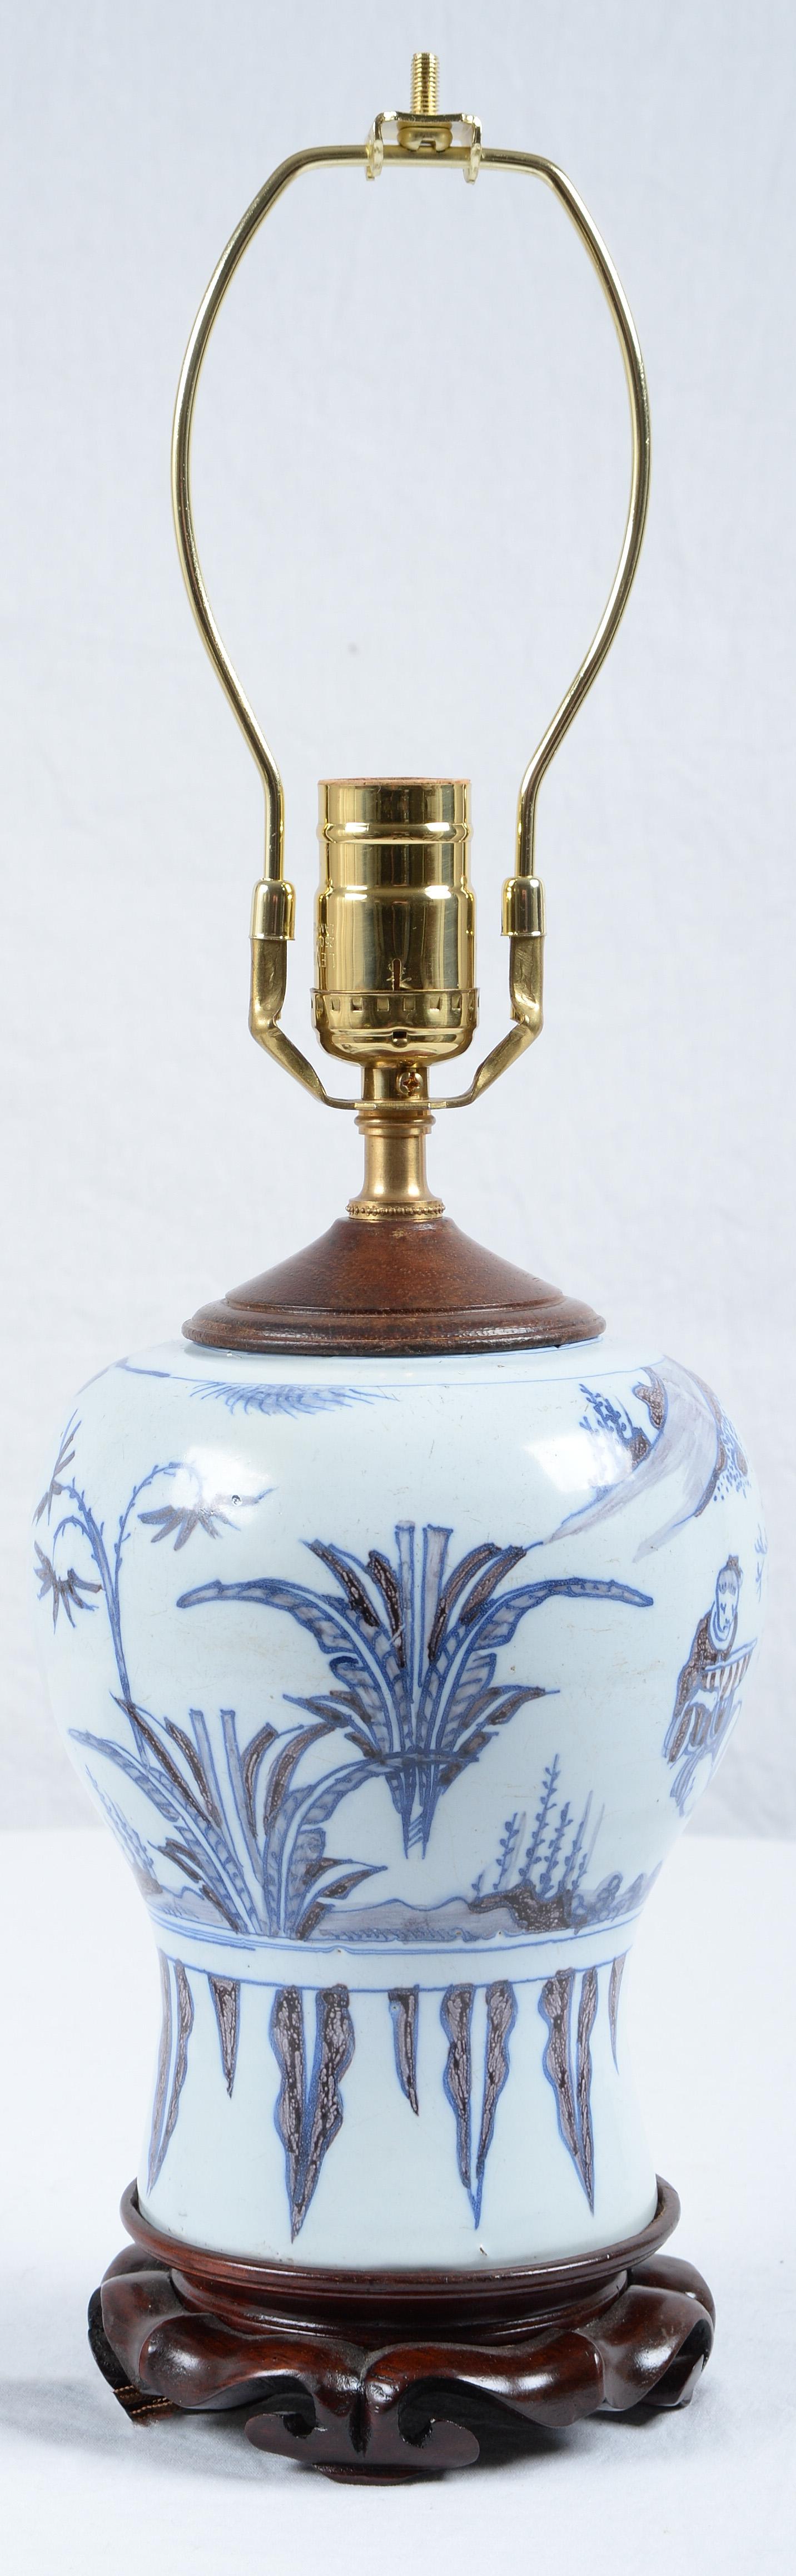 Late 17th Century Dutch Delft Faience Blue and White Chinoiserie Baluster Vase Mounted as a Lamp and newly electrified.
Decorated in imitation of a Chinese Ming vase with a sage, rocks and vegetation, mounted on a wood base. 
The dimensions noted